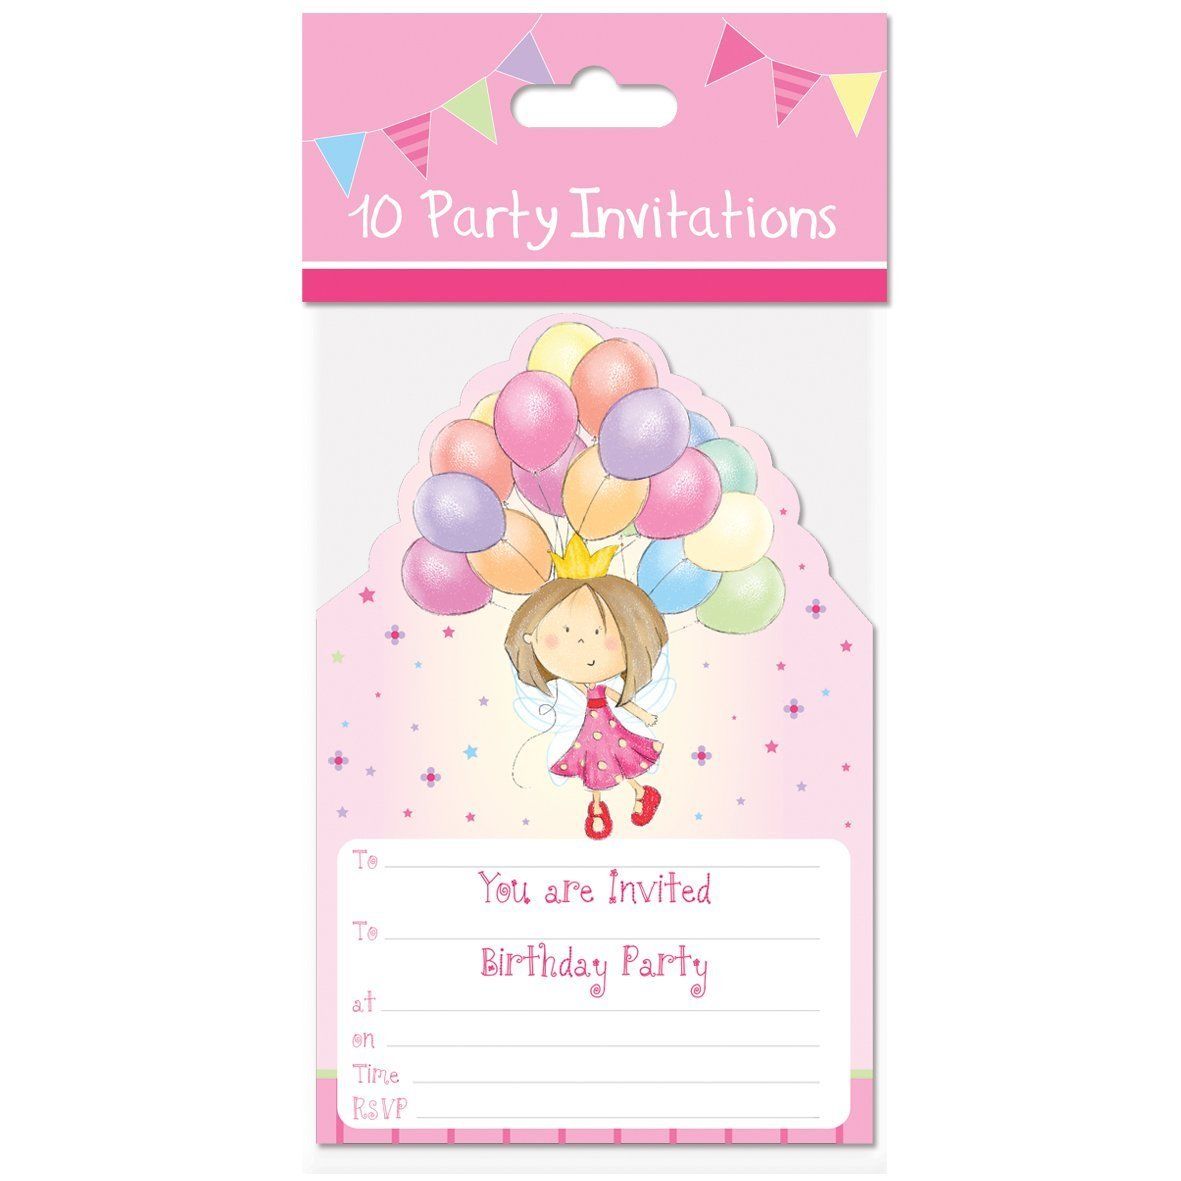 Pack of 10 Princess Design Birthday Party Invitations Cards